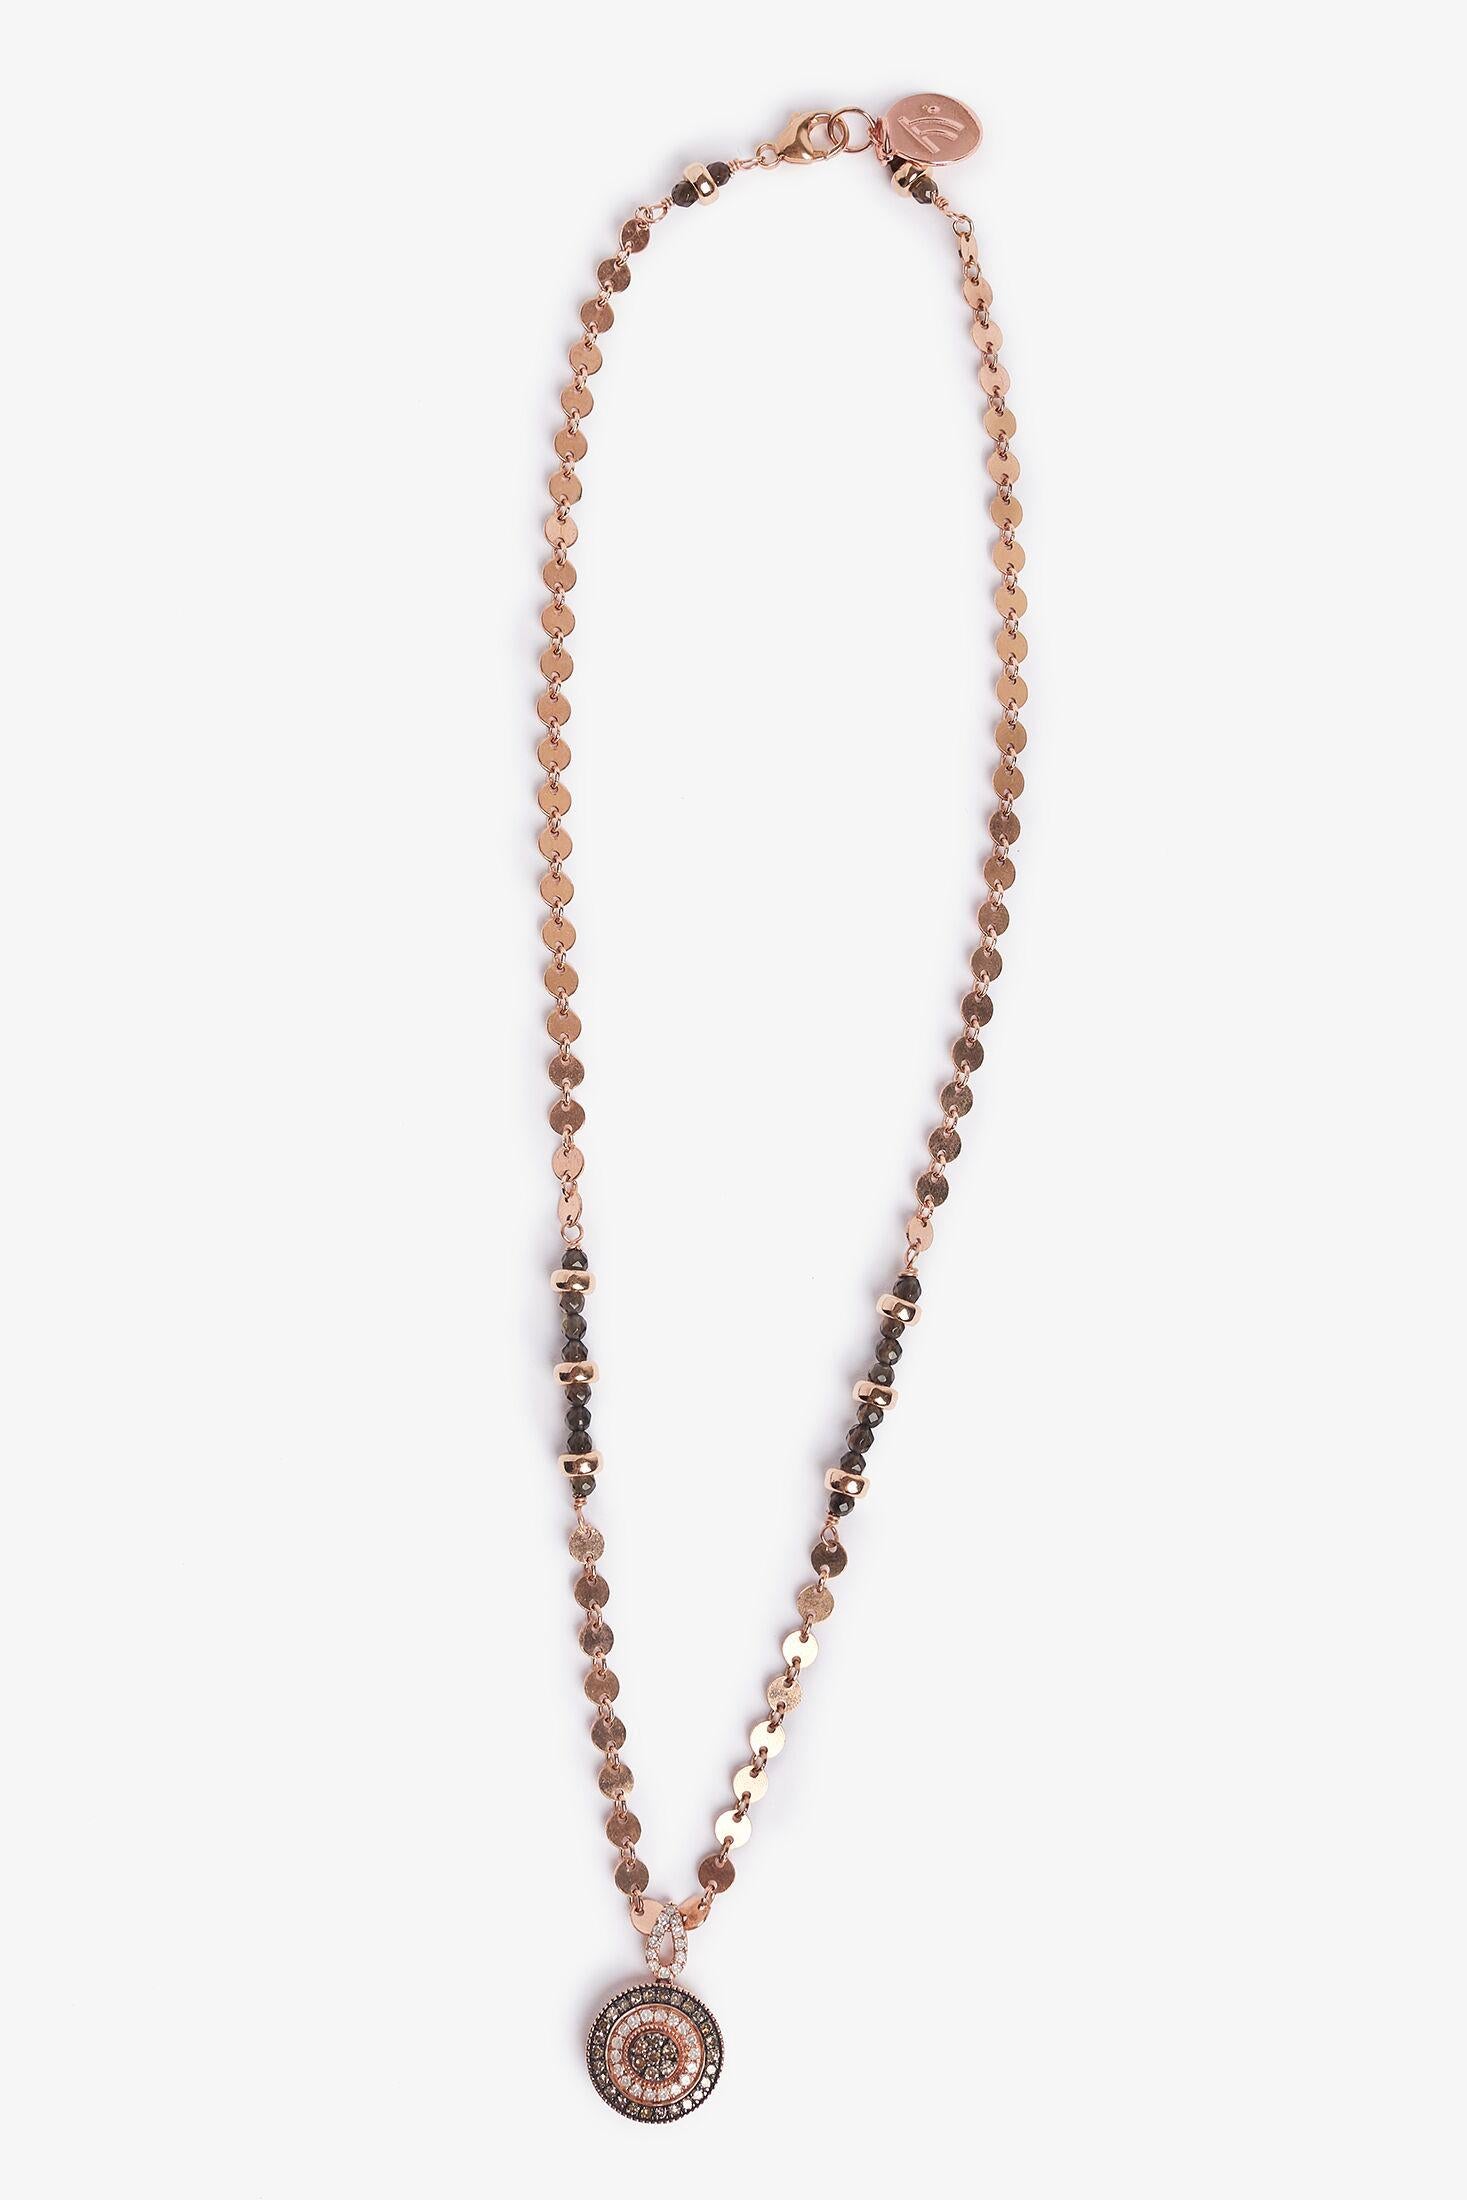 Contemporary Brilliance Brown and White Diamond Rose Gold Necklace For Sale